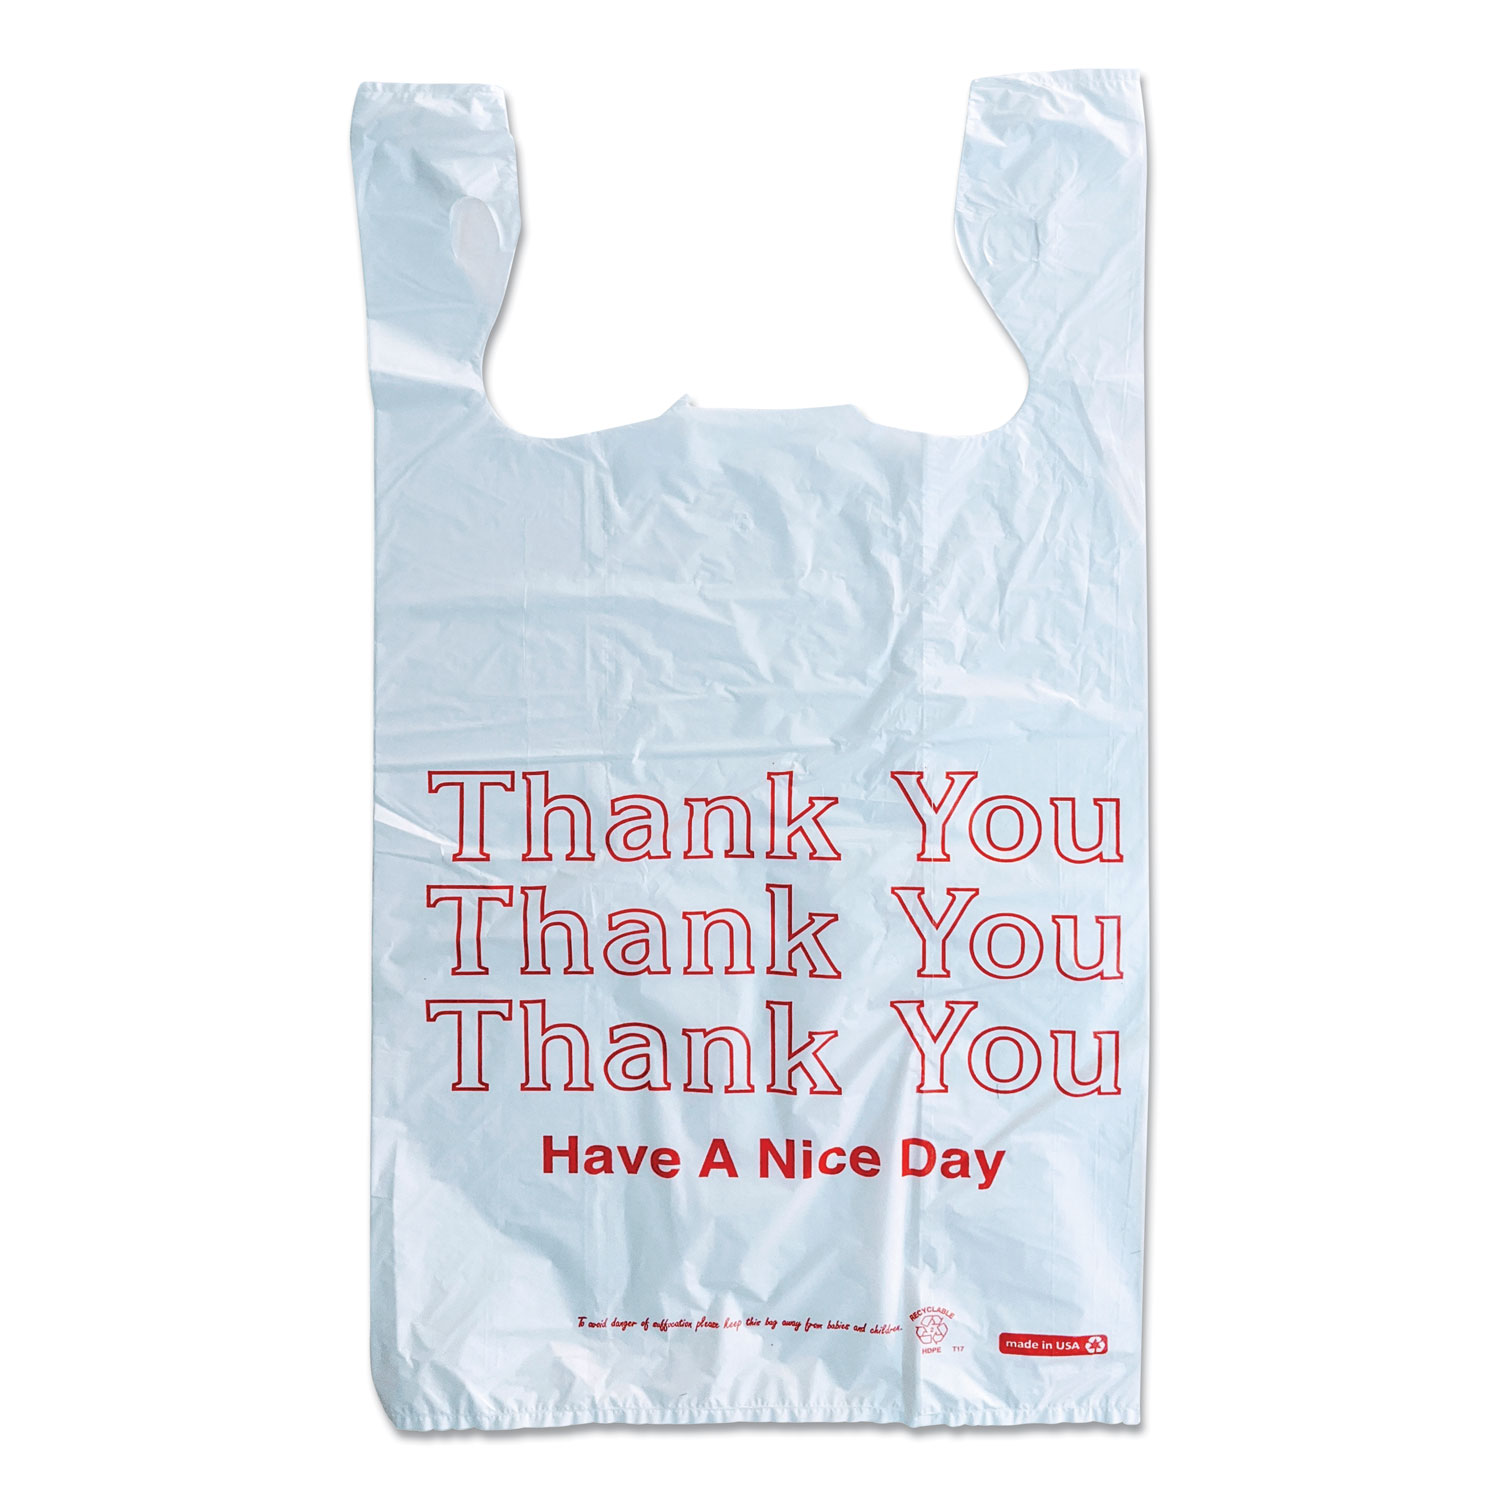 Monarch® Plastic Thank You - Have a Nice Day Shopping Bags, 11.5 x 6.5 x 22, White, 250/Box